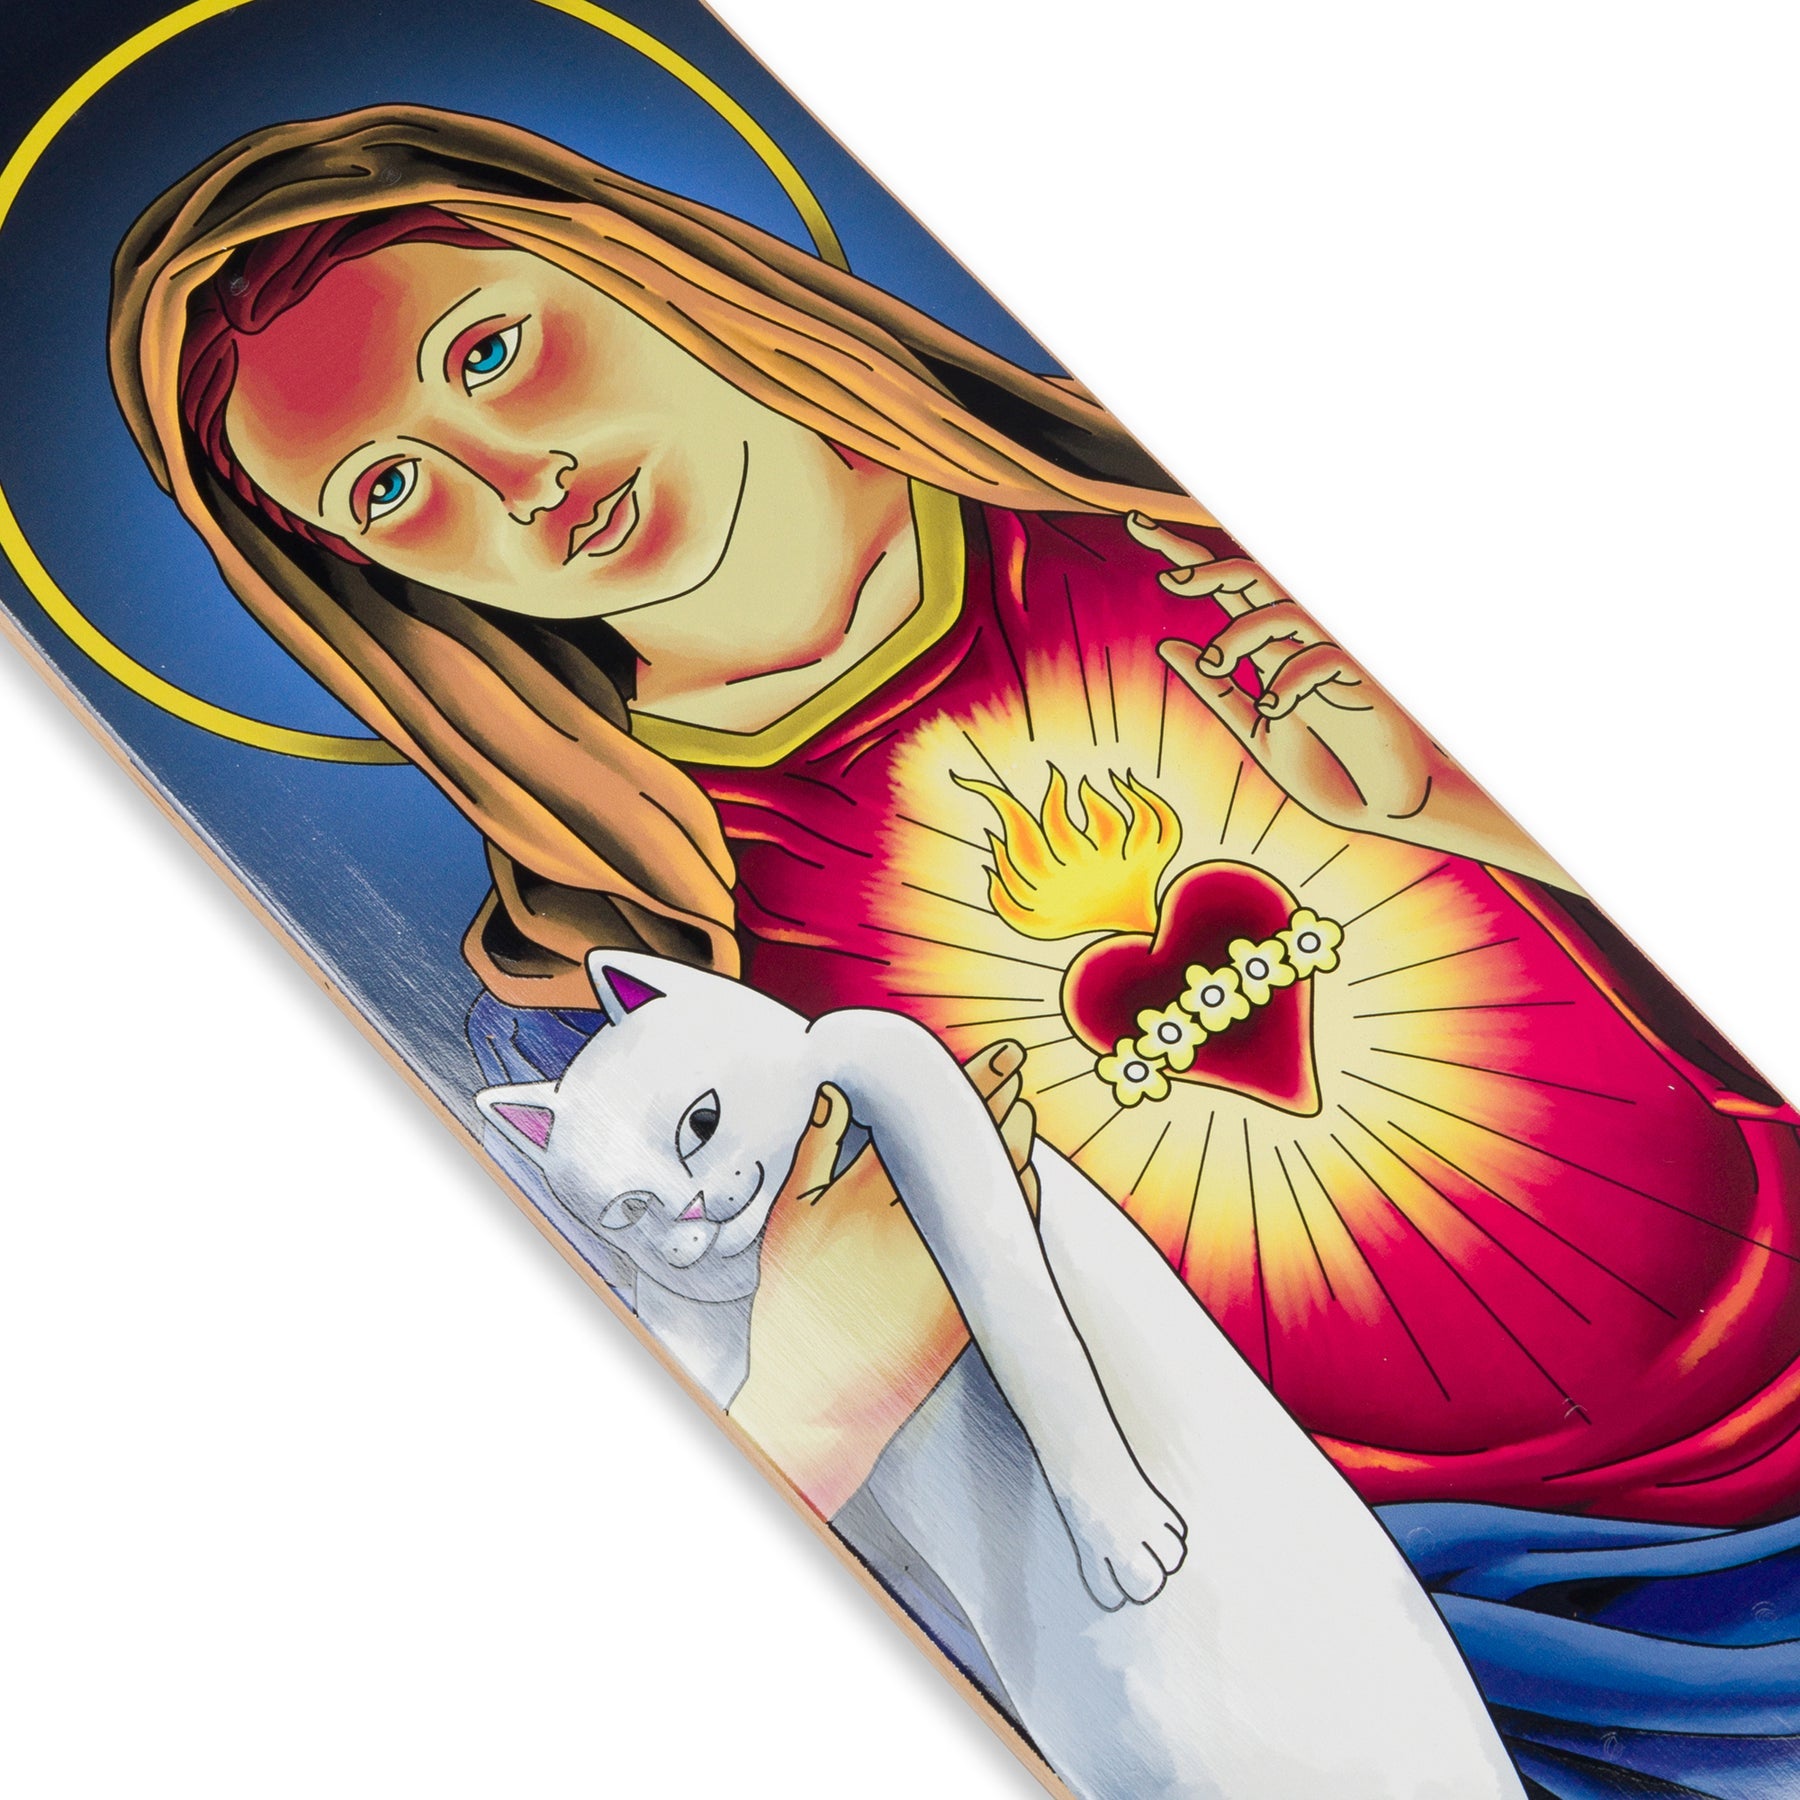 Mother Mary Board